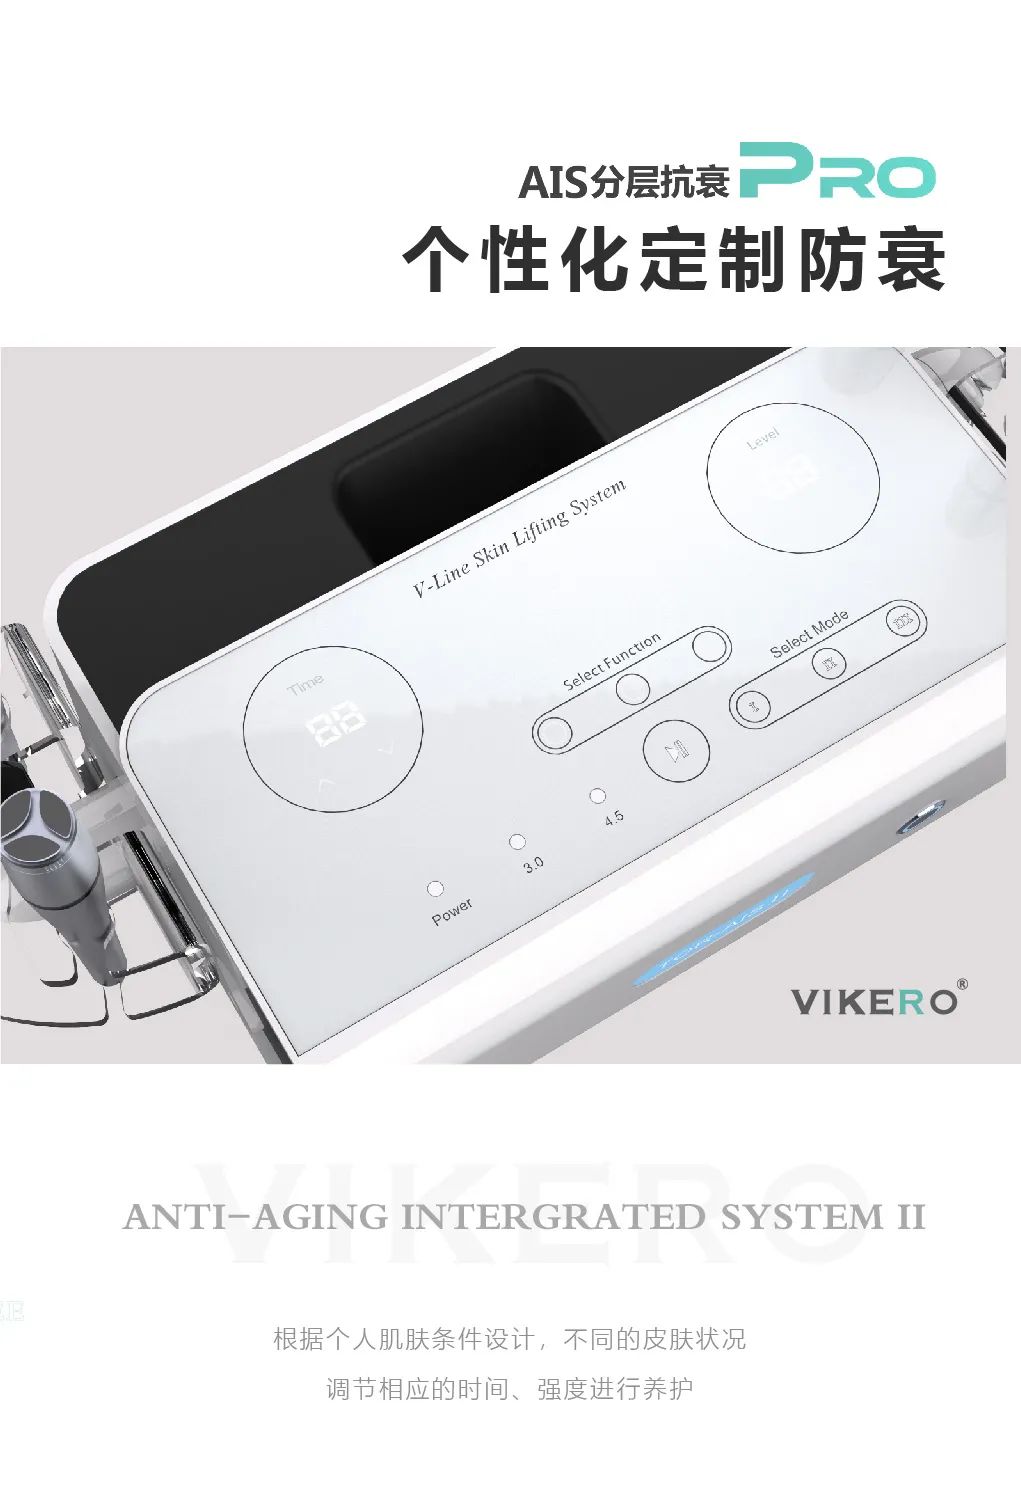 Anti-aging Intergrated System II